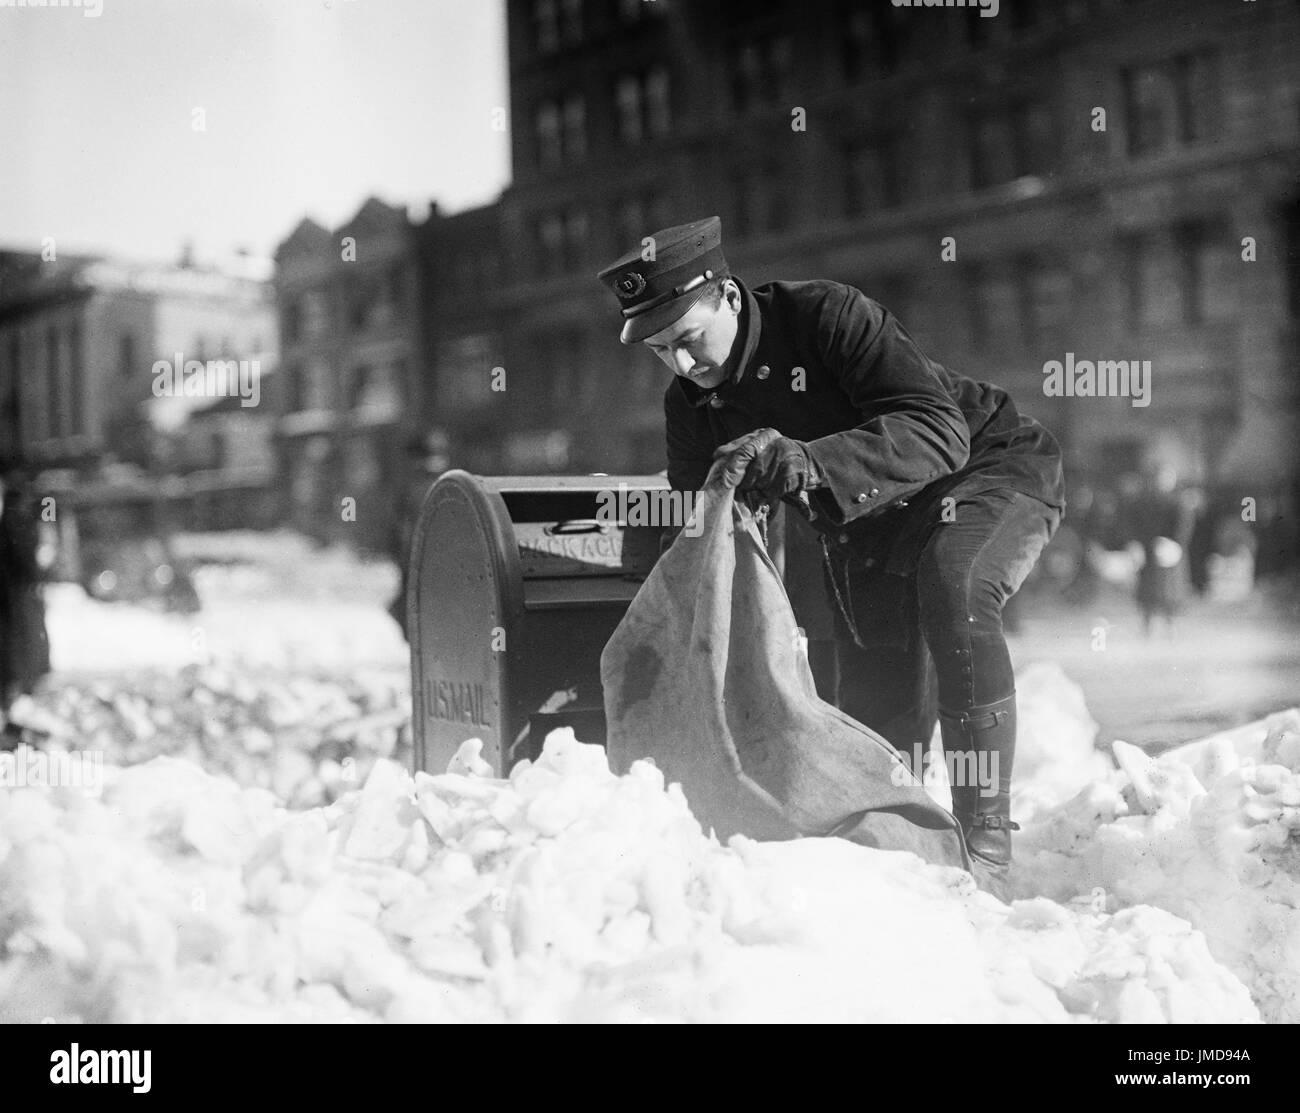 Mailman Collecting Mail from Mailbox after Blizzard, Washington DC, USA, Harris and Ewing, January 1922 Stock Photo